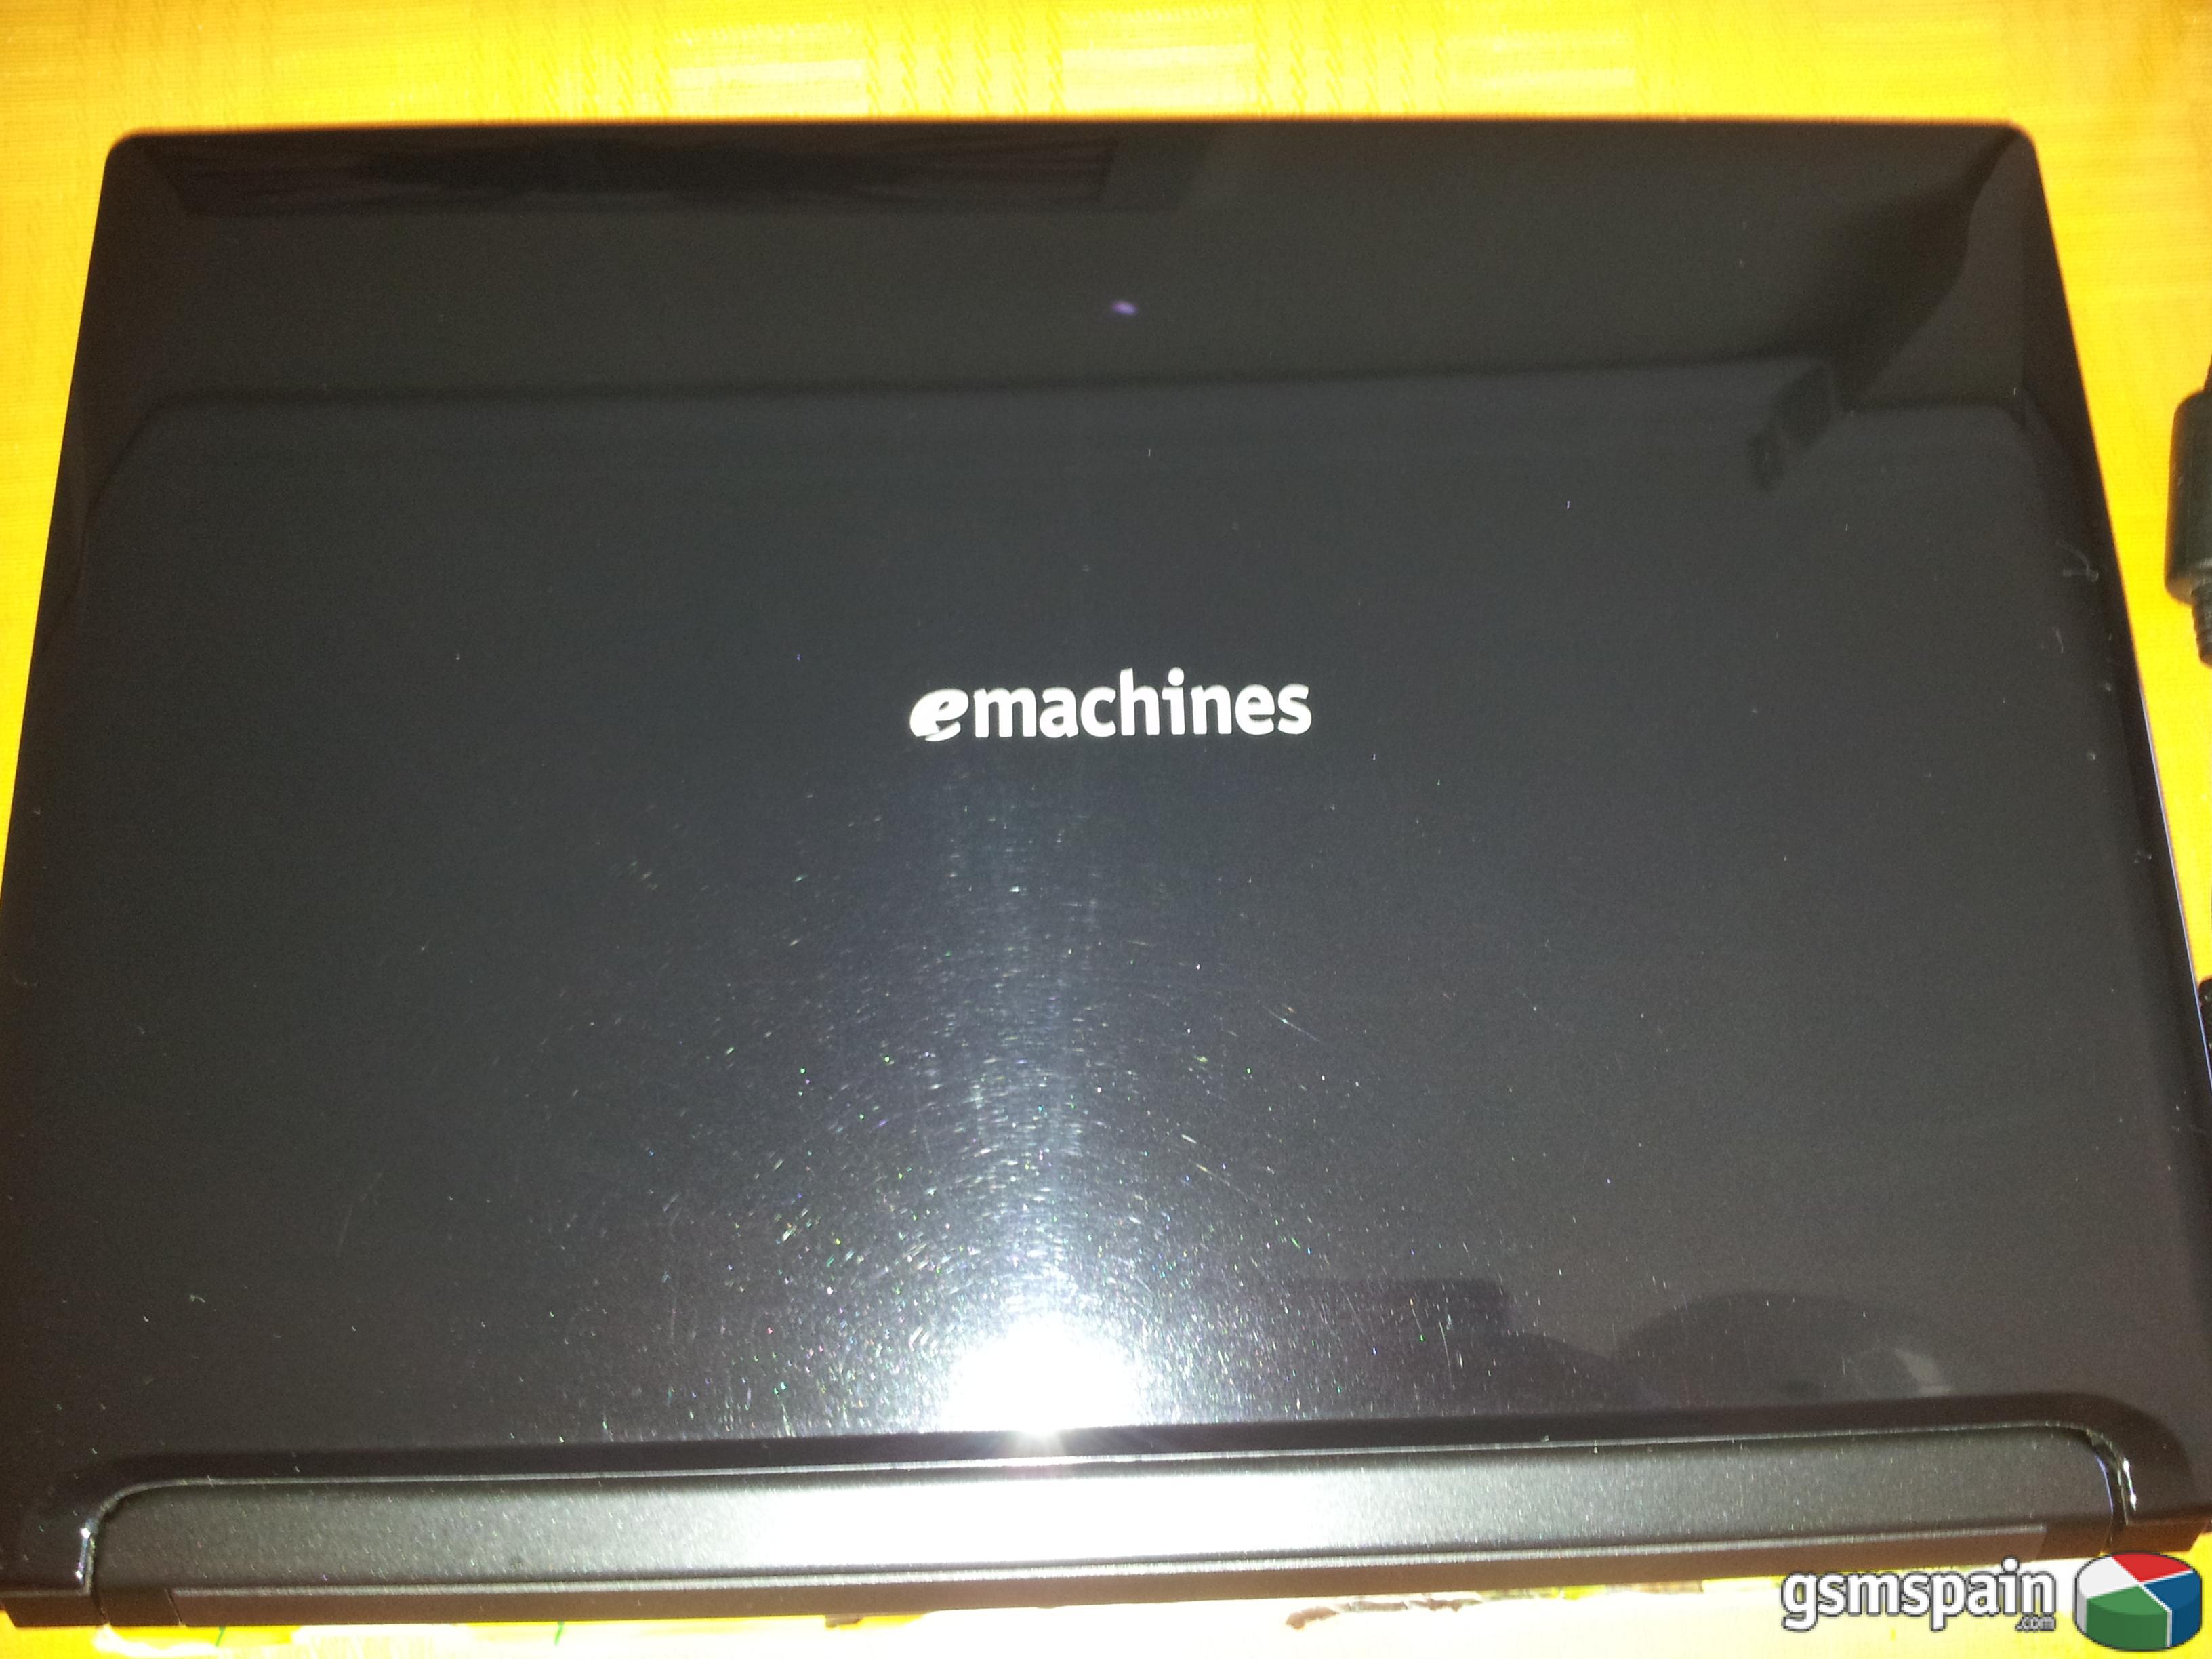 [VENDO] Netbook Acer eMachines impecable